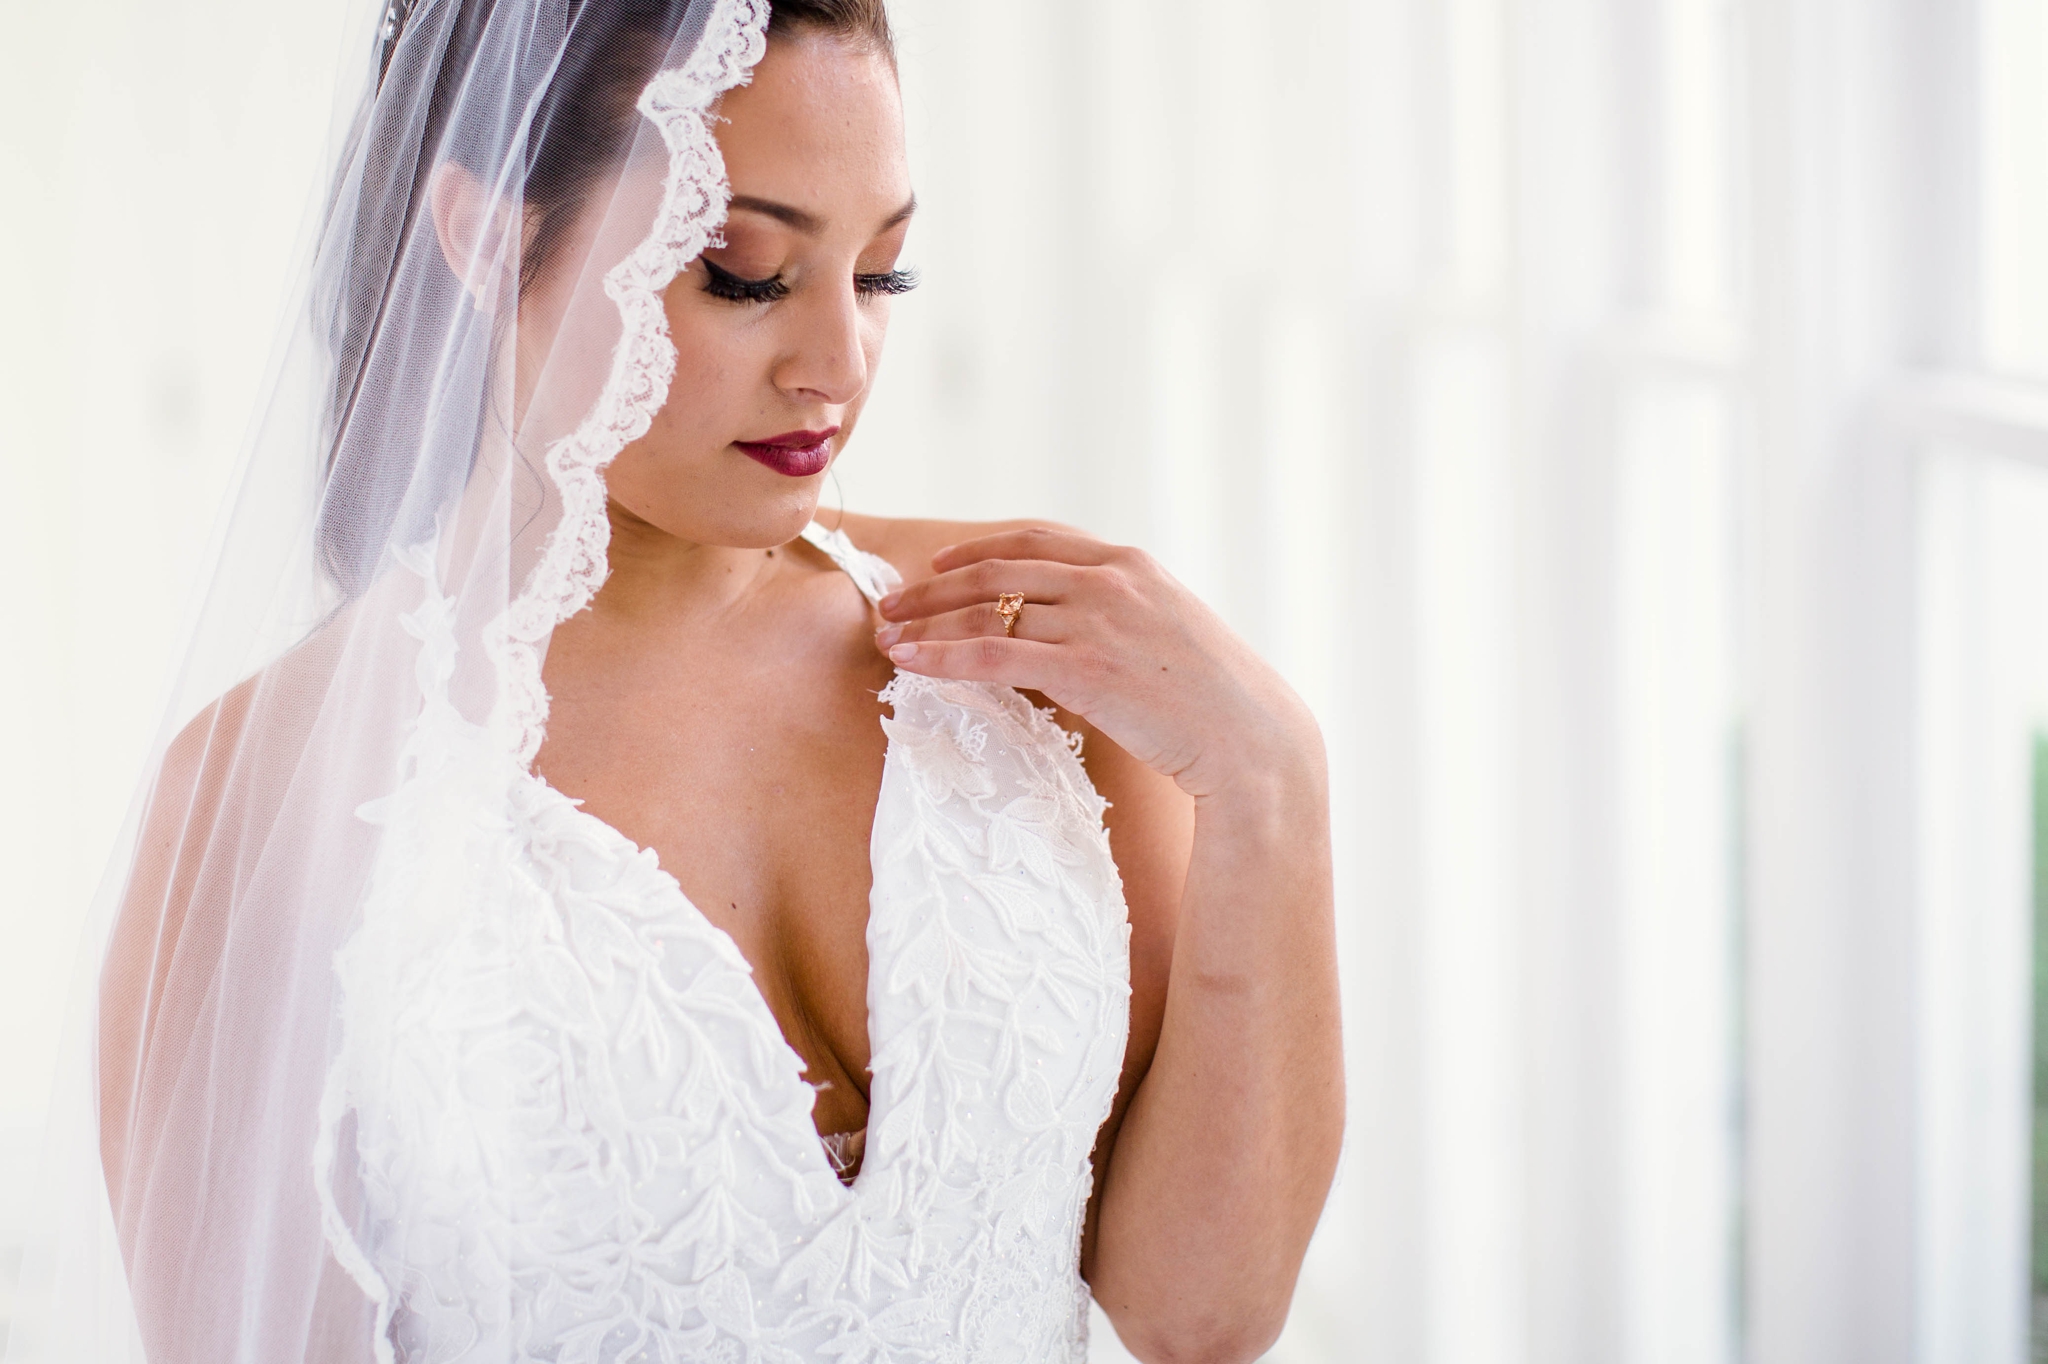  Natural light Bridal Portraits in an all white luxury estate venue with black and white floors and a golden chandelier - Bride is wearing a Ballgown Wedding Dress by Sherri Hill - shot with available window light - Fine Art Wedding Photographer in H